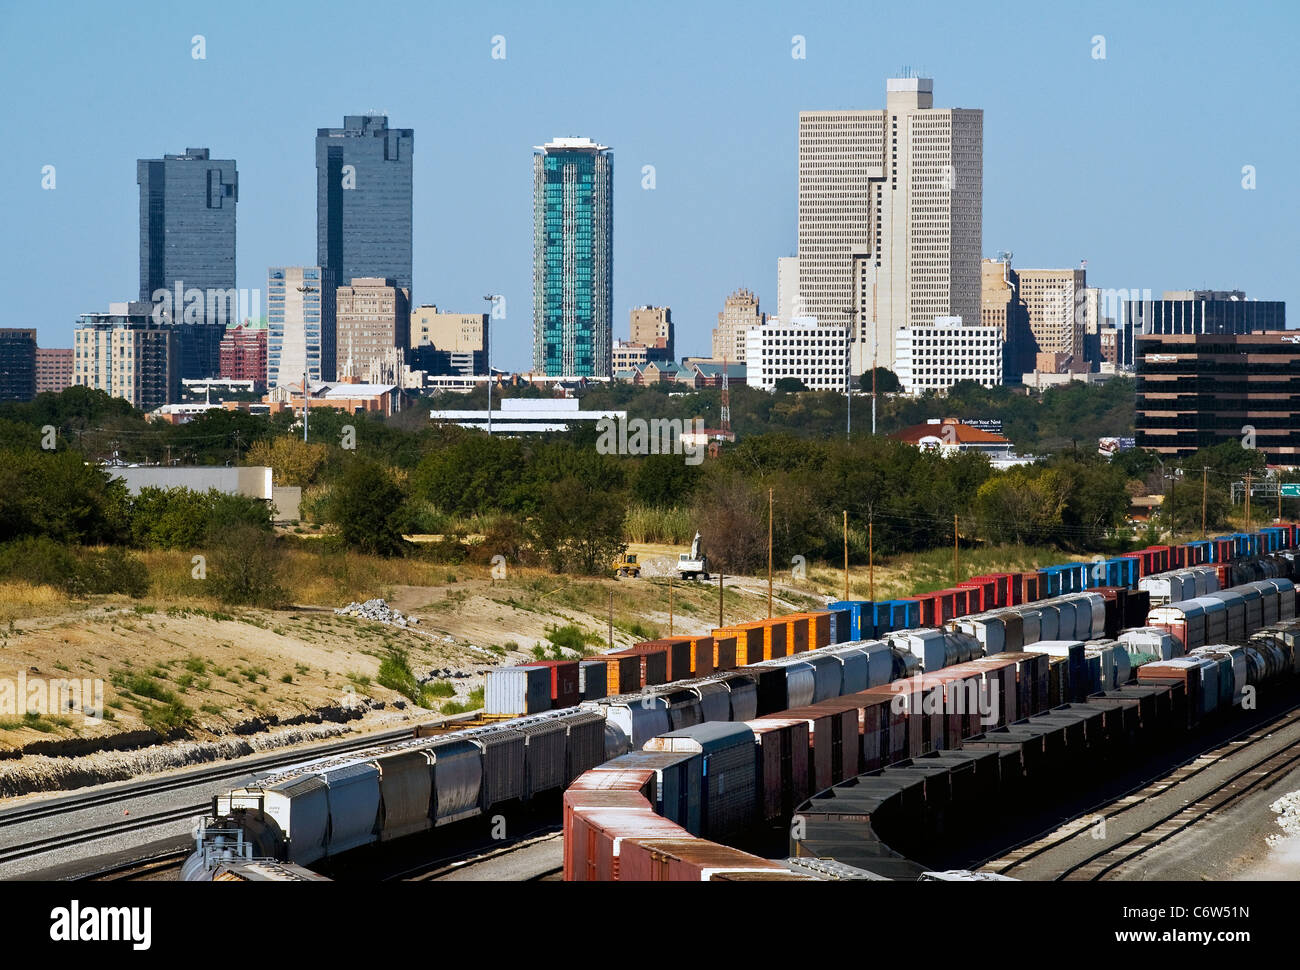 Treno cantiere in Fort Worth, Texas. Foto Stock